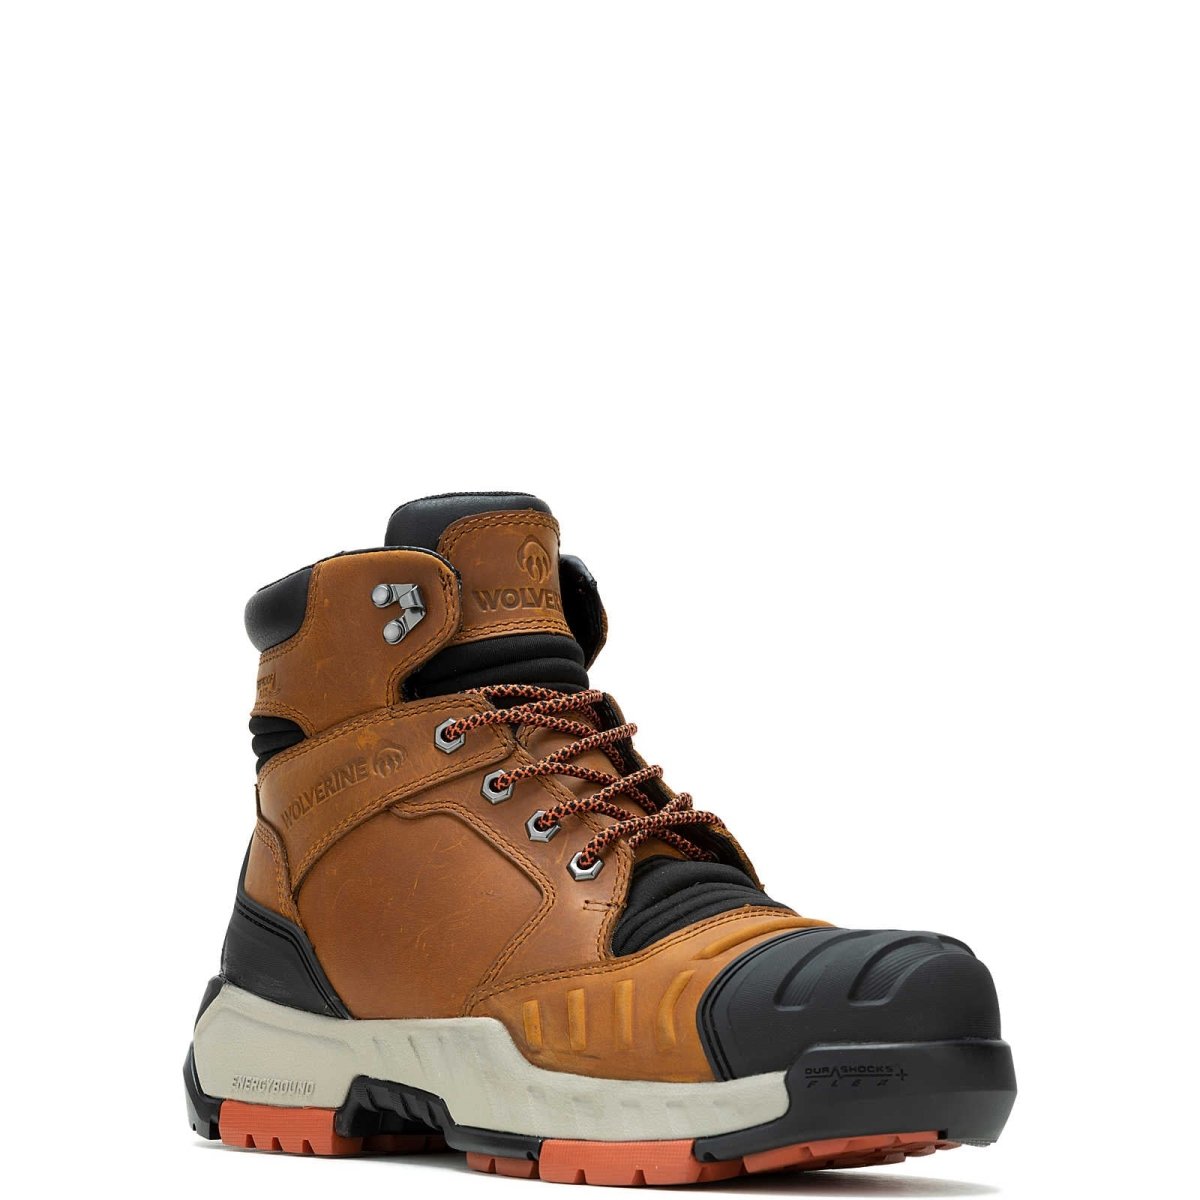 WOLVERINE DS TORQUE MEN'S WORK BOOT (W231120) IN COPPER - TLW Shoes